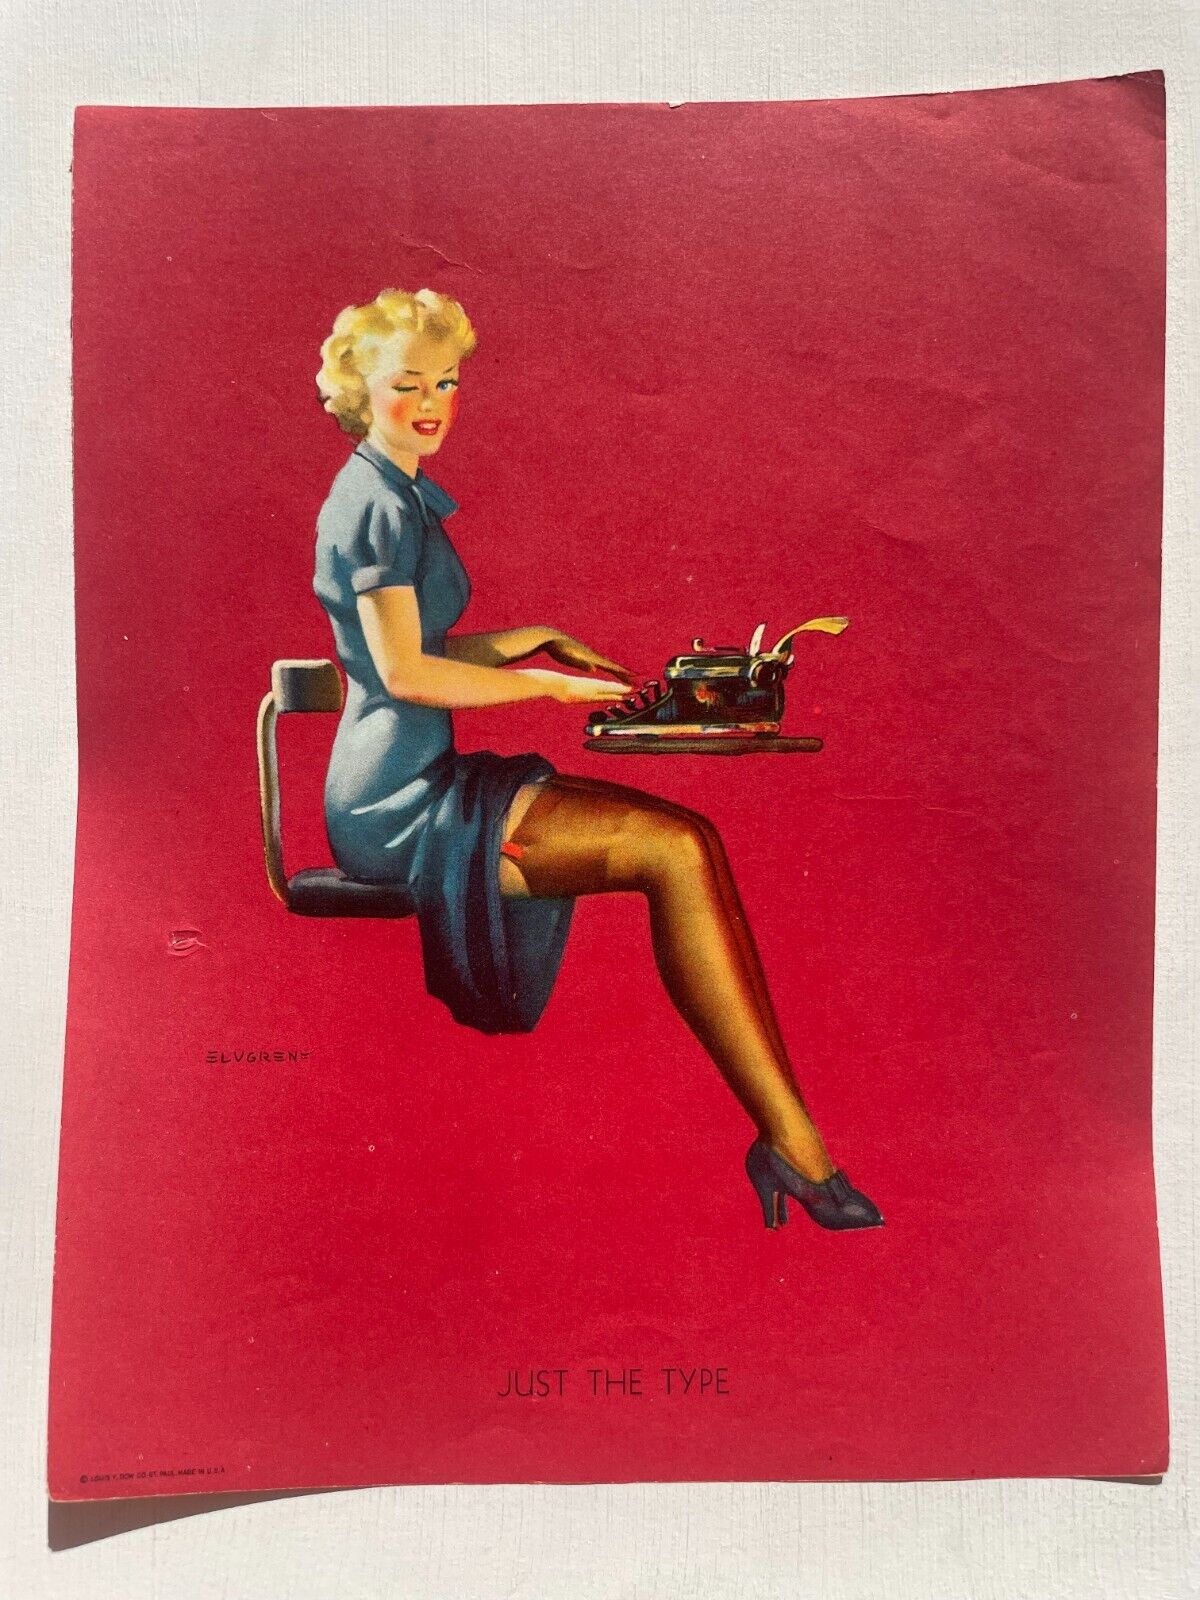 Vintage 1940s Pinup Girl Picture  by Gil Elvgren- Just the Type